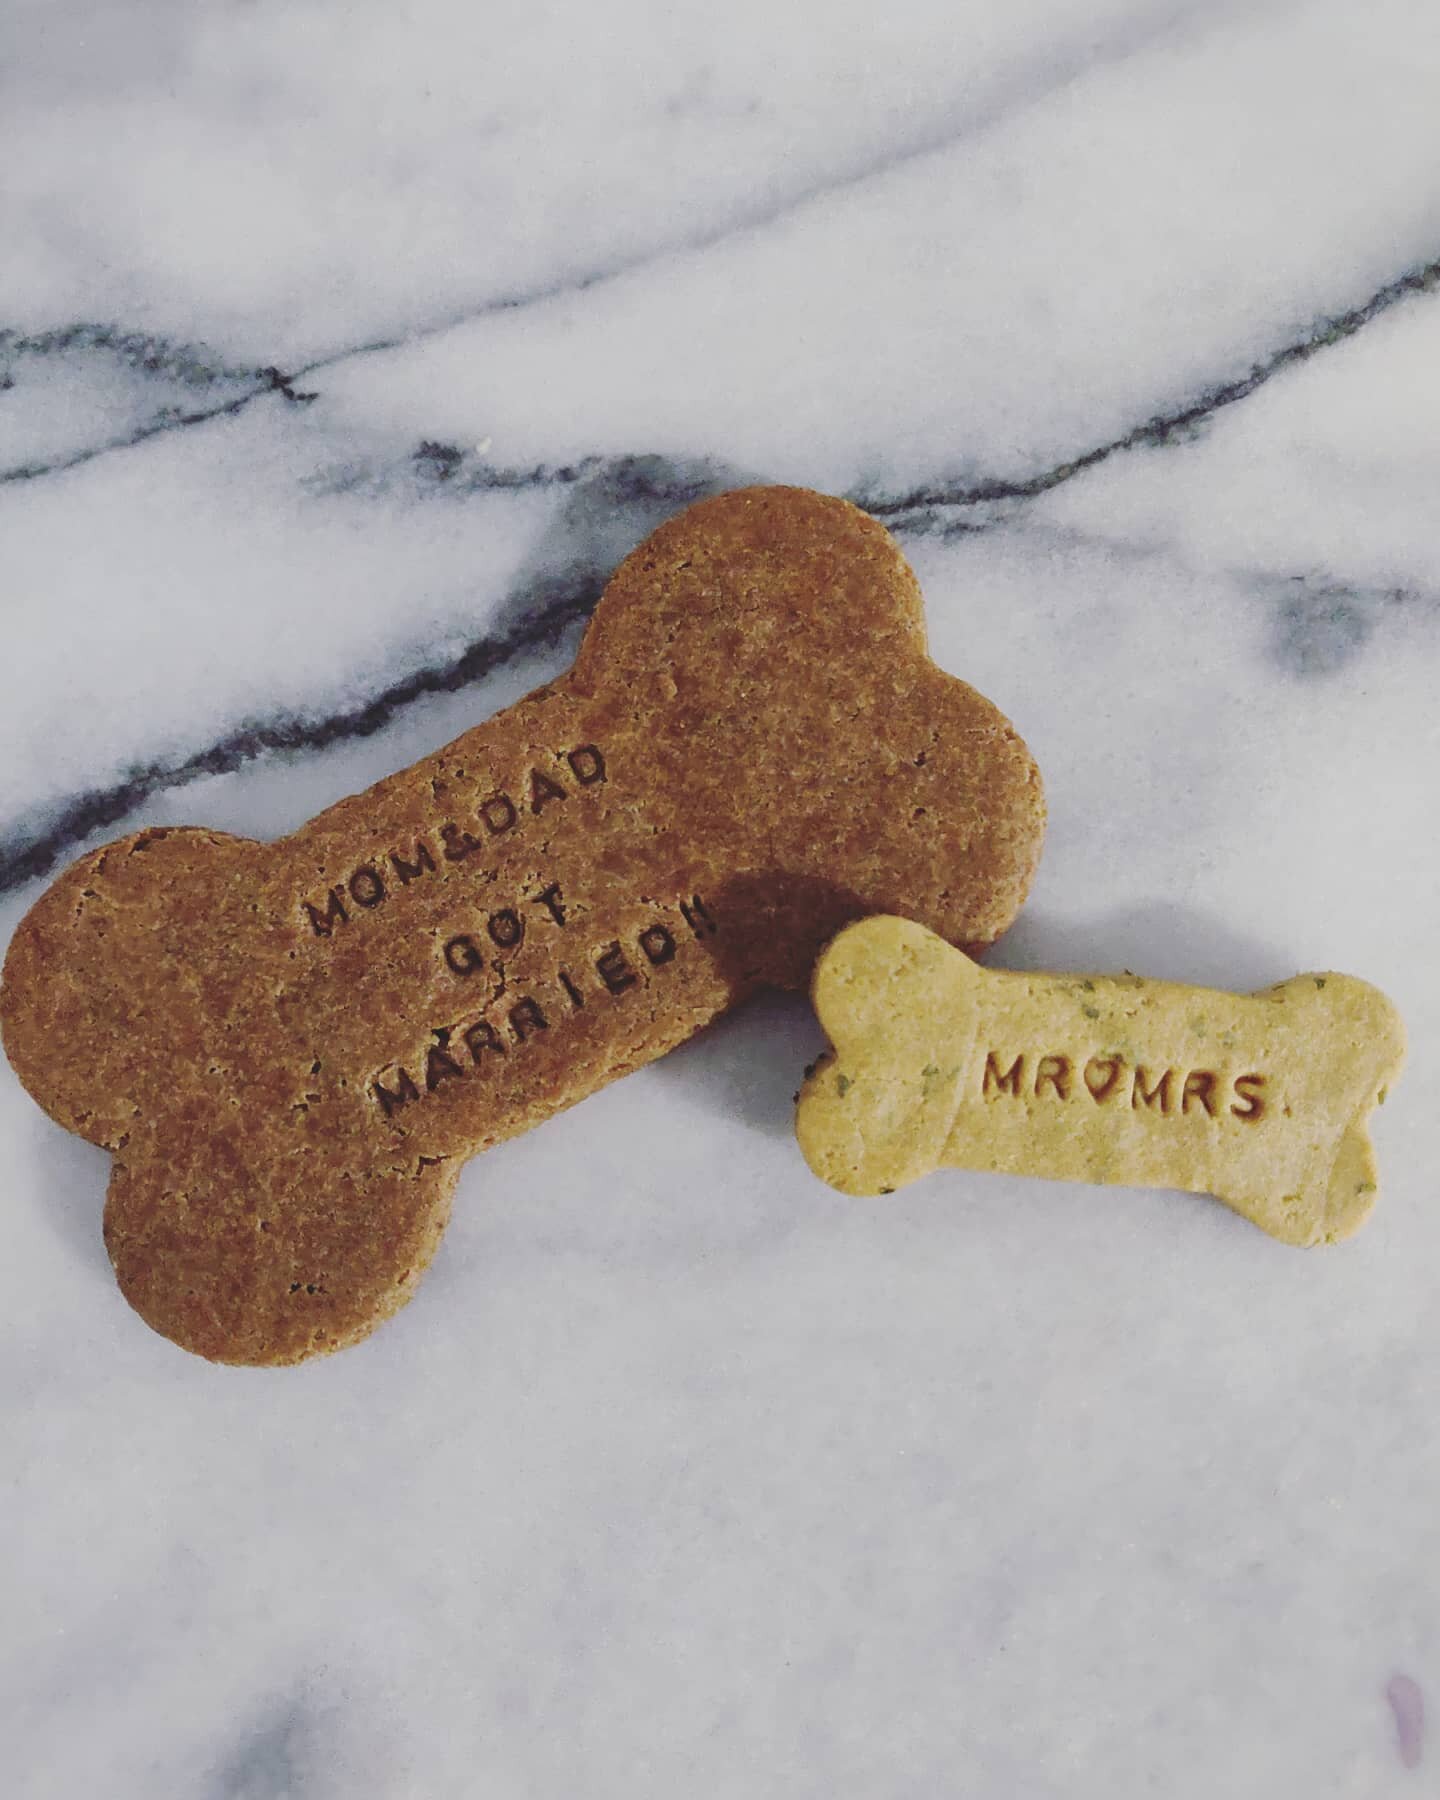 Are you or someone you love getting married? Are they obsessed with their dog? Give individually wrapped treats as favors for guests to take home to their pup! Fully custom from flavor to topping to packaging. Have you been to a wedding featuring the